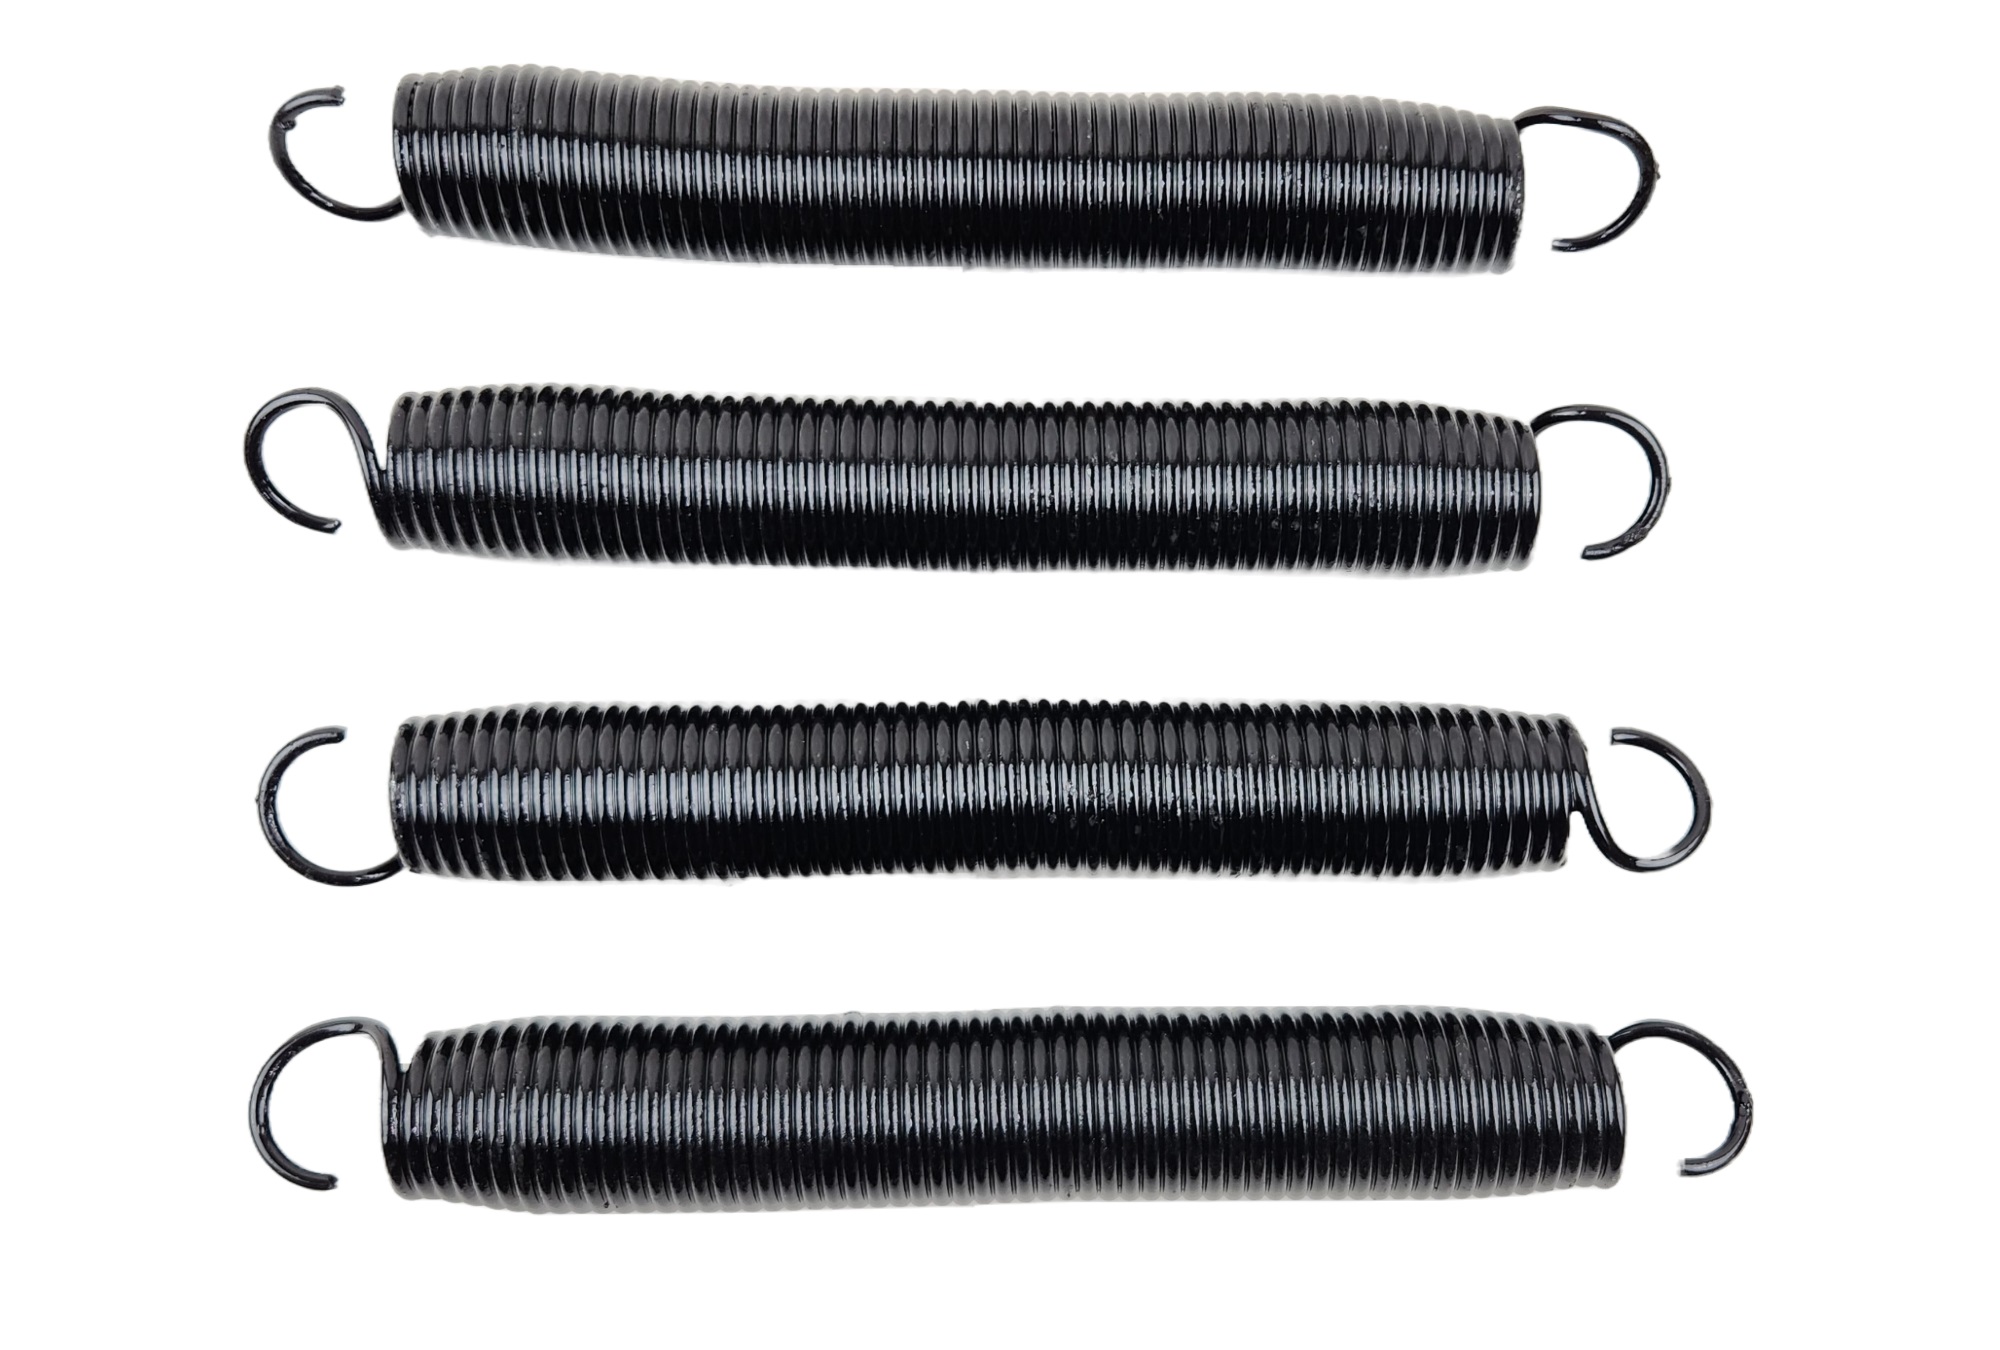 HWH R37135 Replacement Spring Kit for Hydraulic Leveling Jacks - Pair (4 Springs)